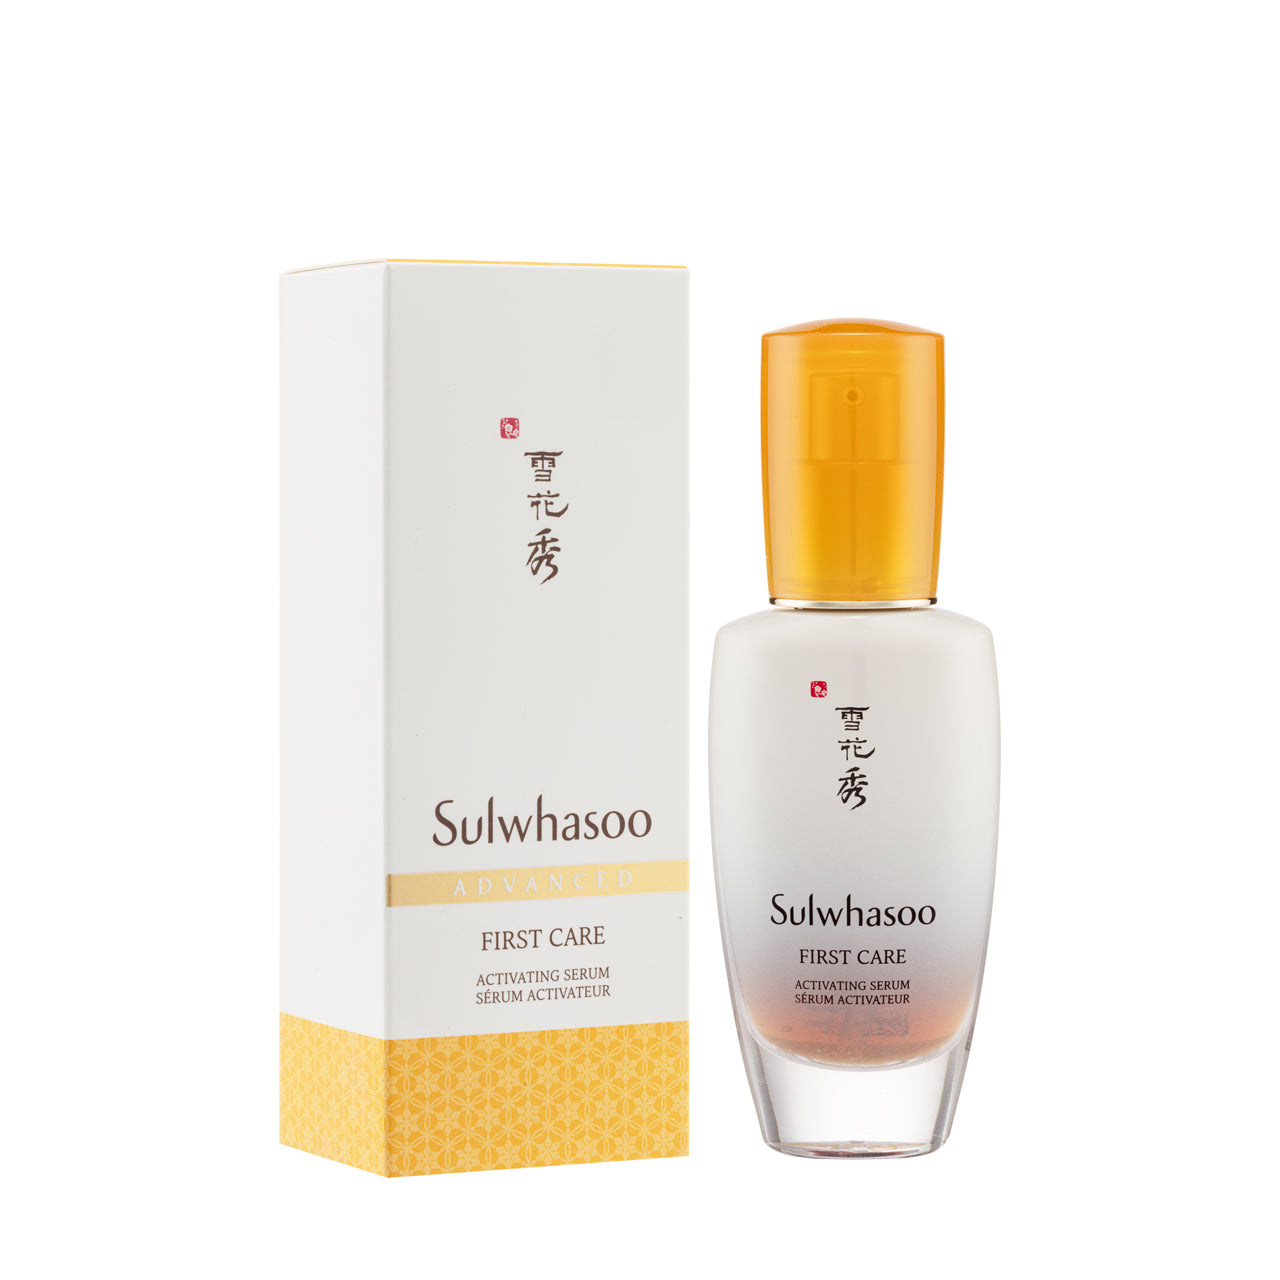 Sulwhasoo FIRST CARE ACTIVATING SERUM (60ml) 雪花秀 潤燥再生精華 (60ml)